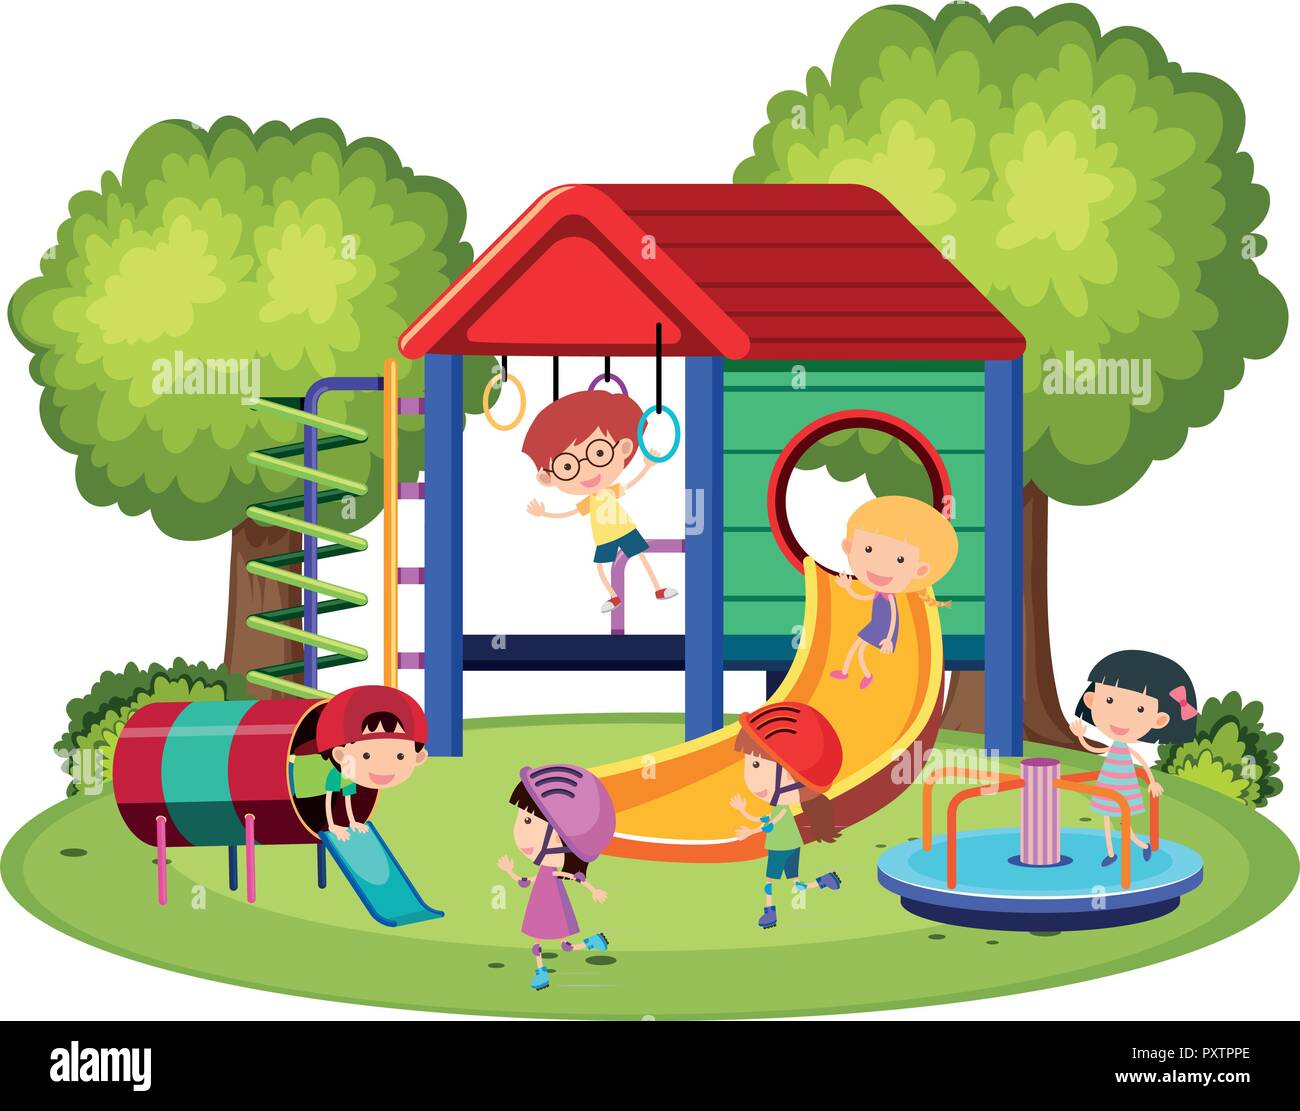 Happy Kids Playing In The Playground Illustration Stock Vector Image